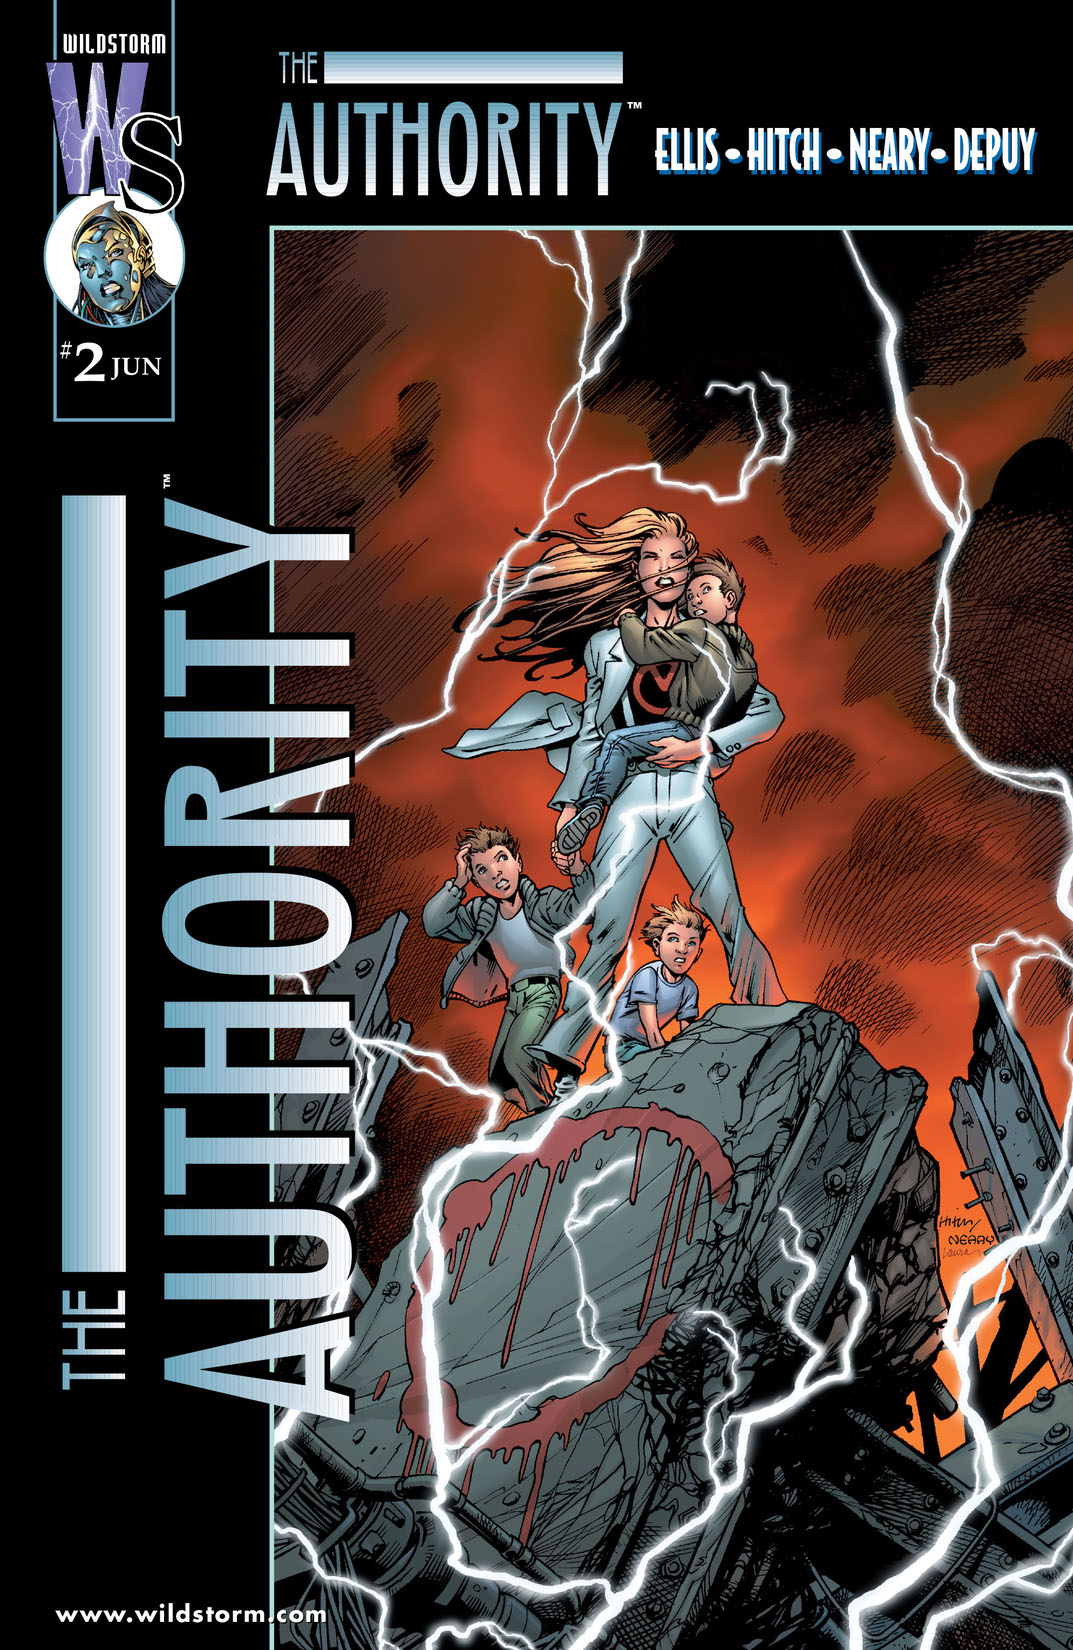 The Authority (1999-) #2 preview images